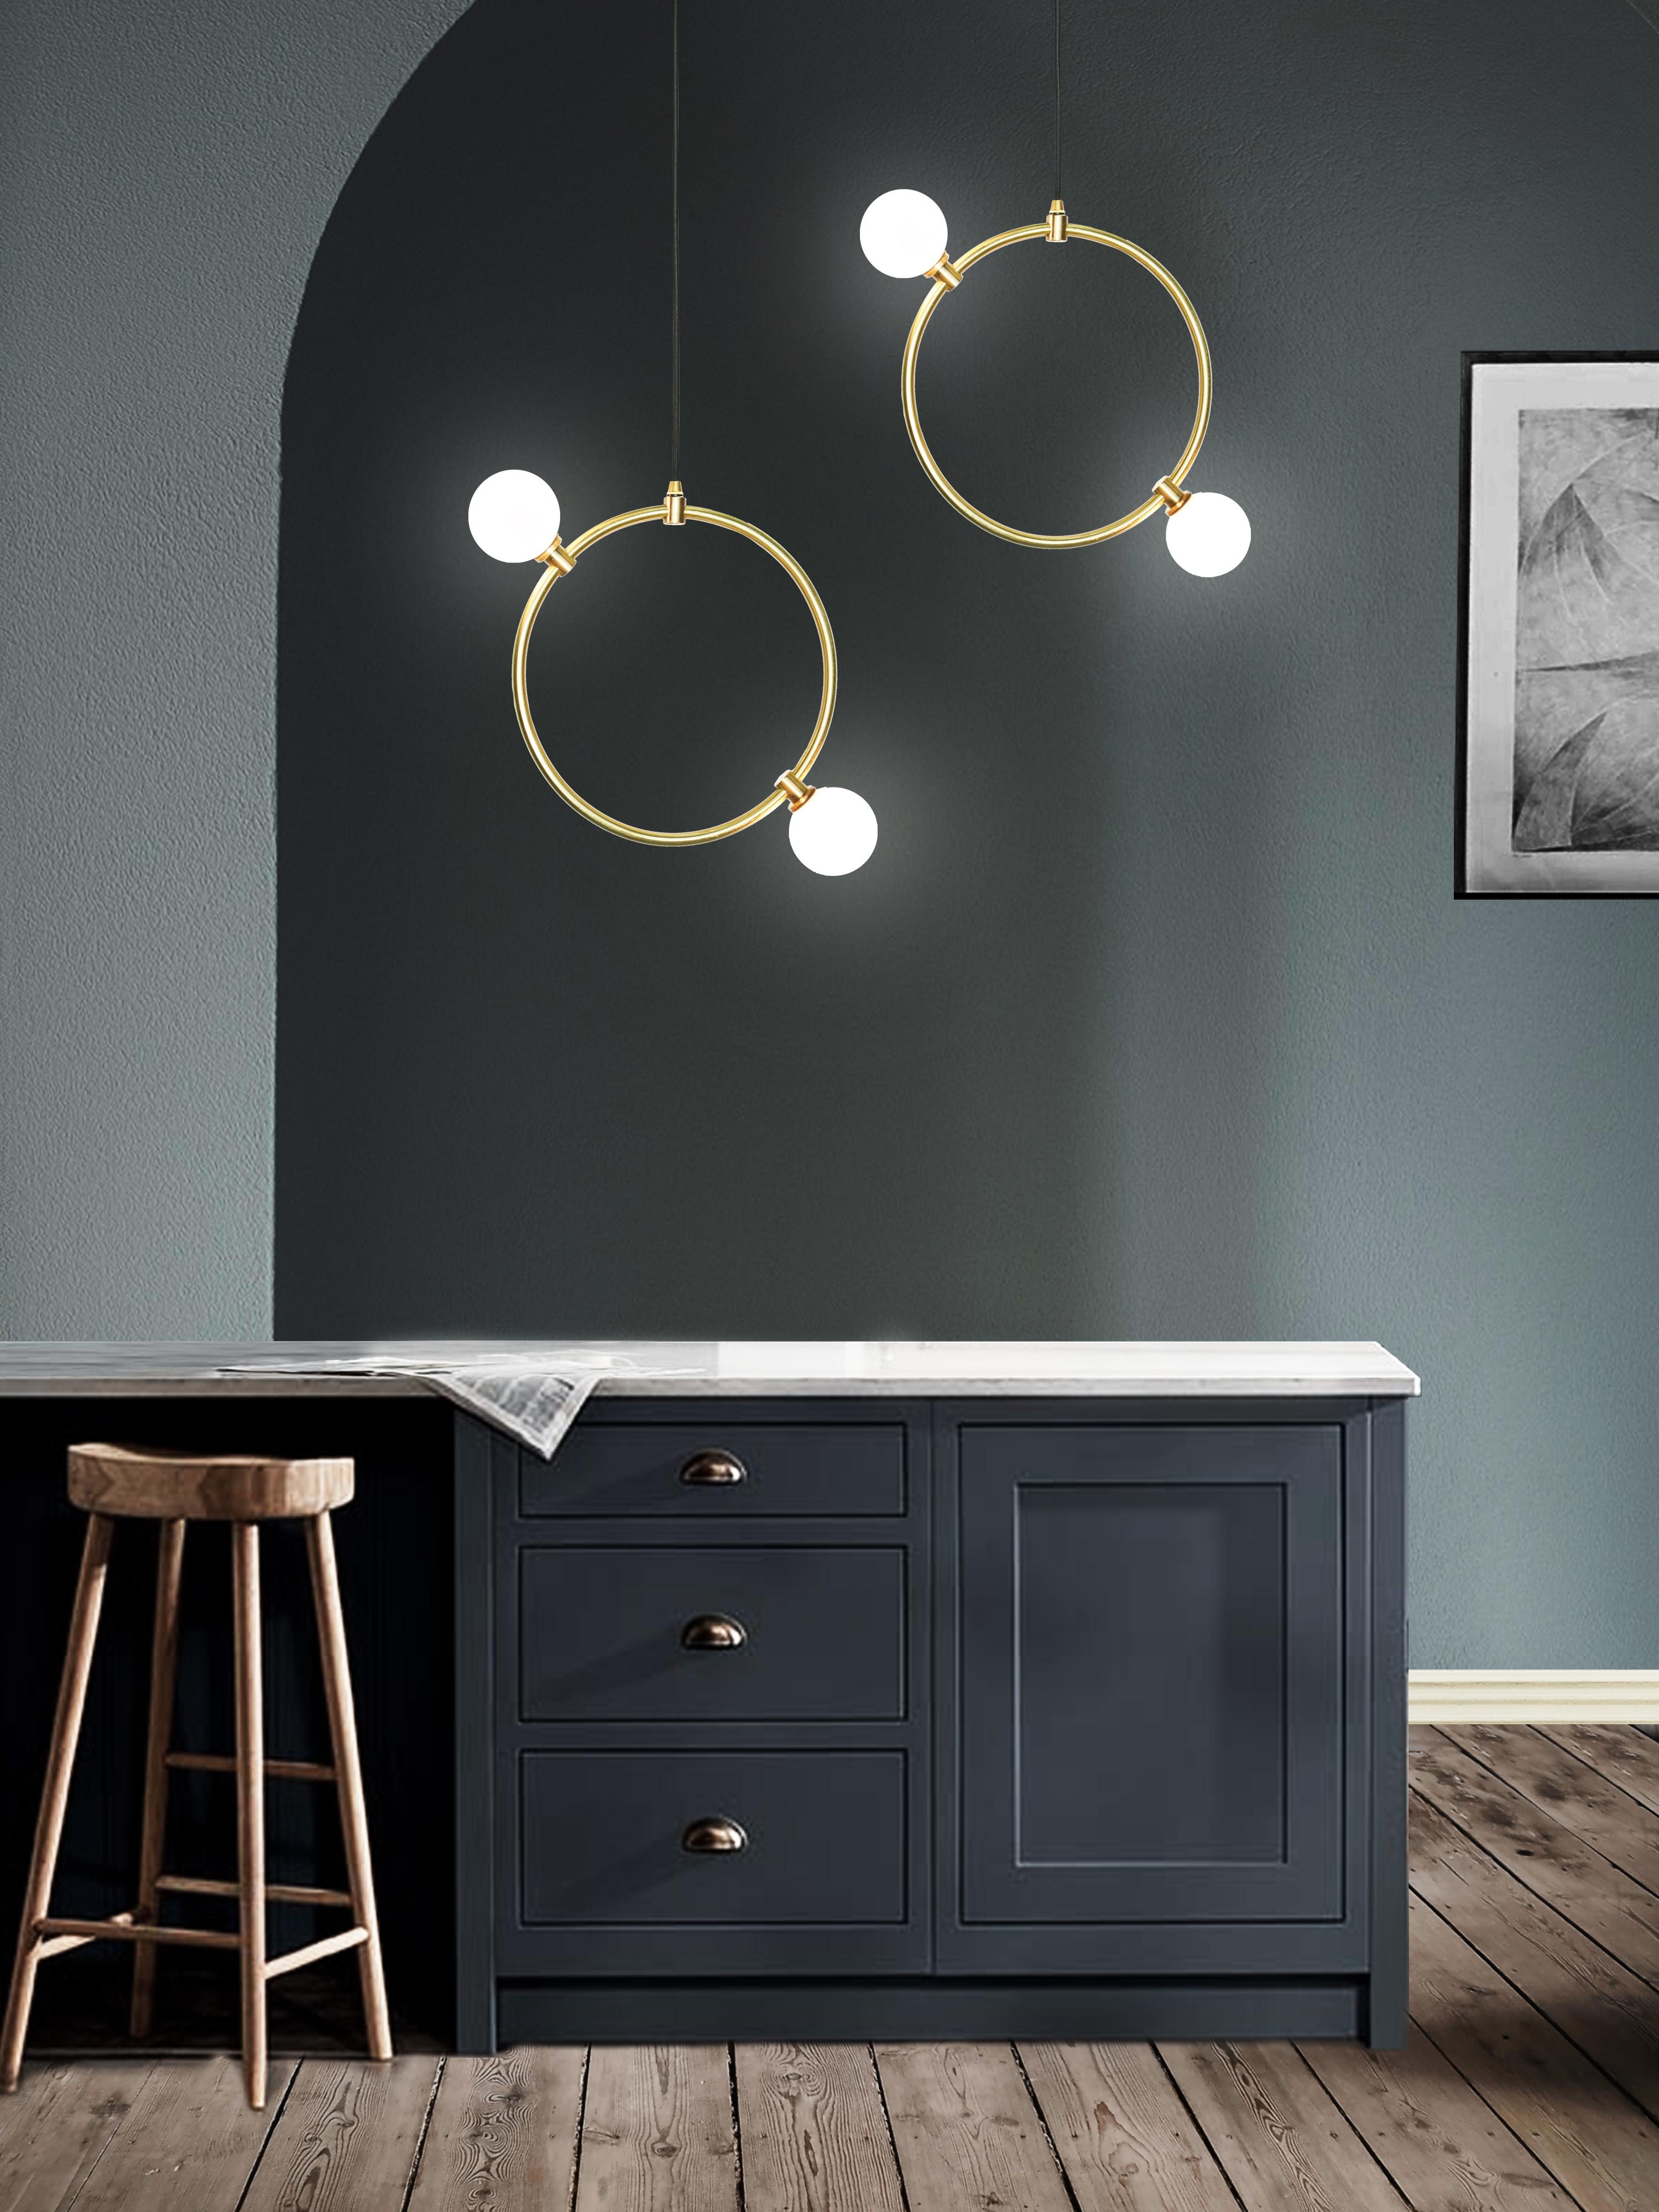 A decorative lighting feature inspired by the notion of light cascading through open space. The modular collection is comprised of whitened crystal glass orbs, fastened to delicate brass rings. 

The rings can be hung as singular pieces or in